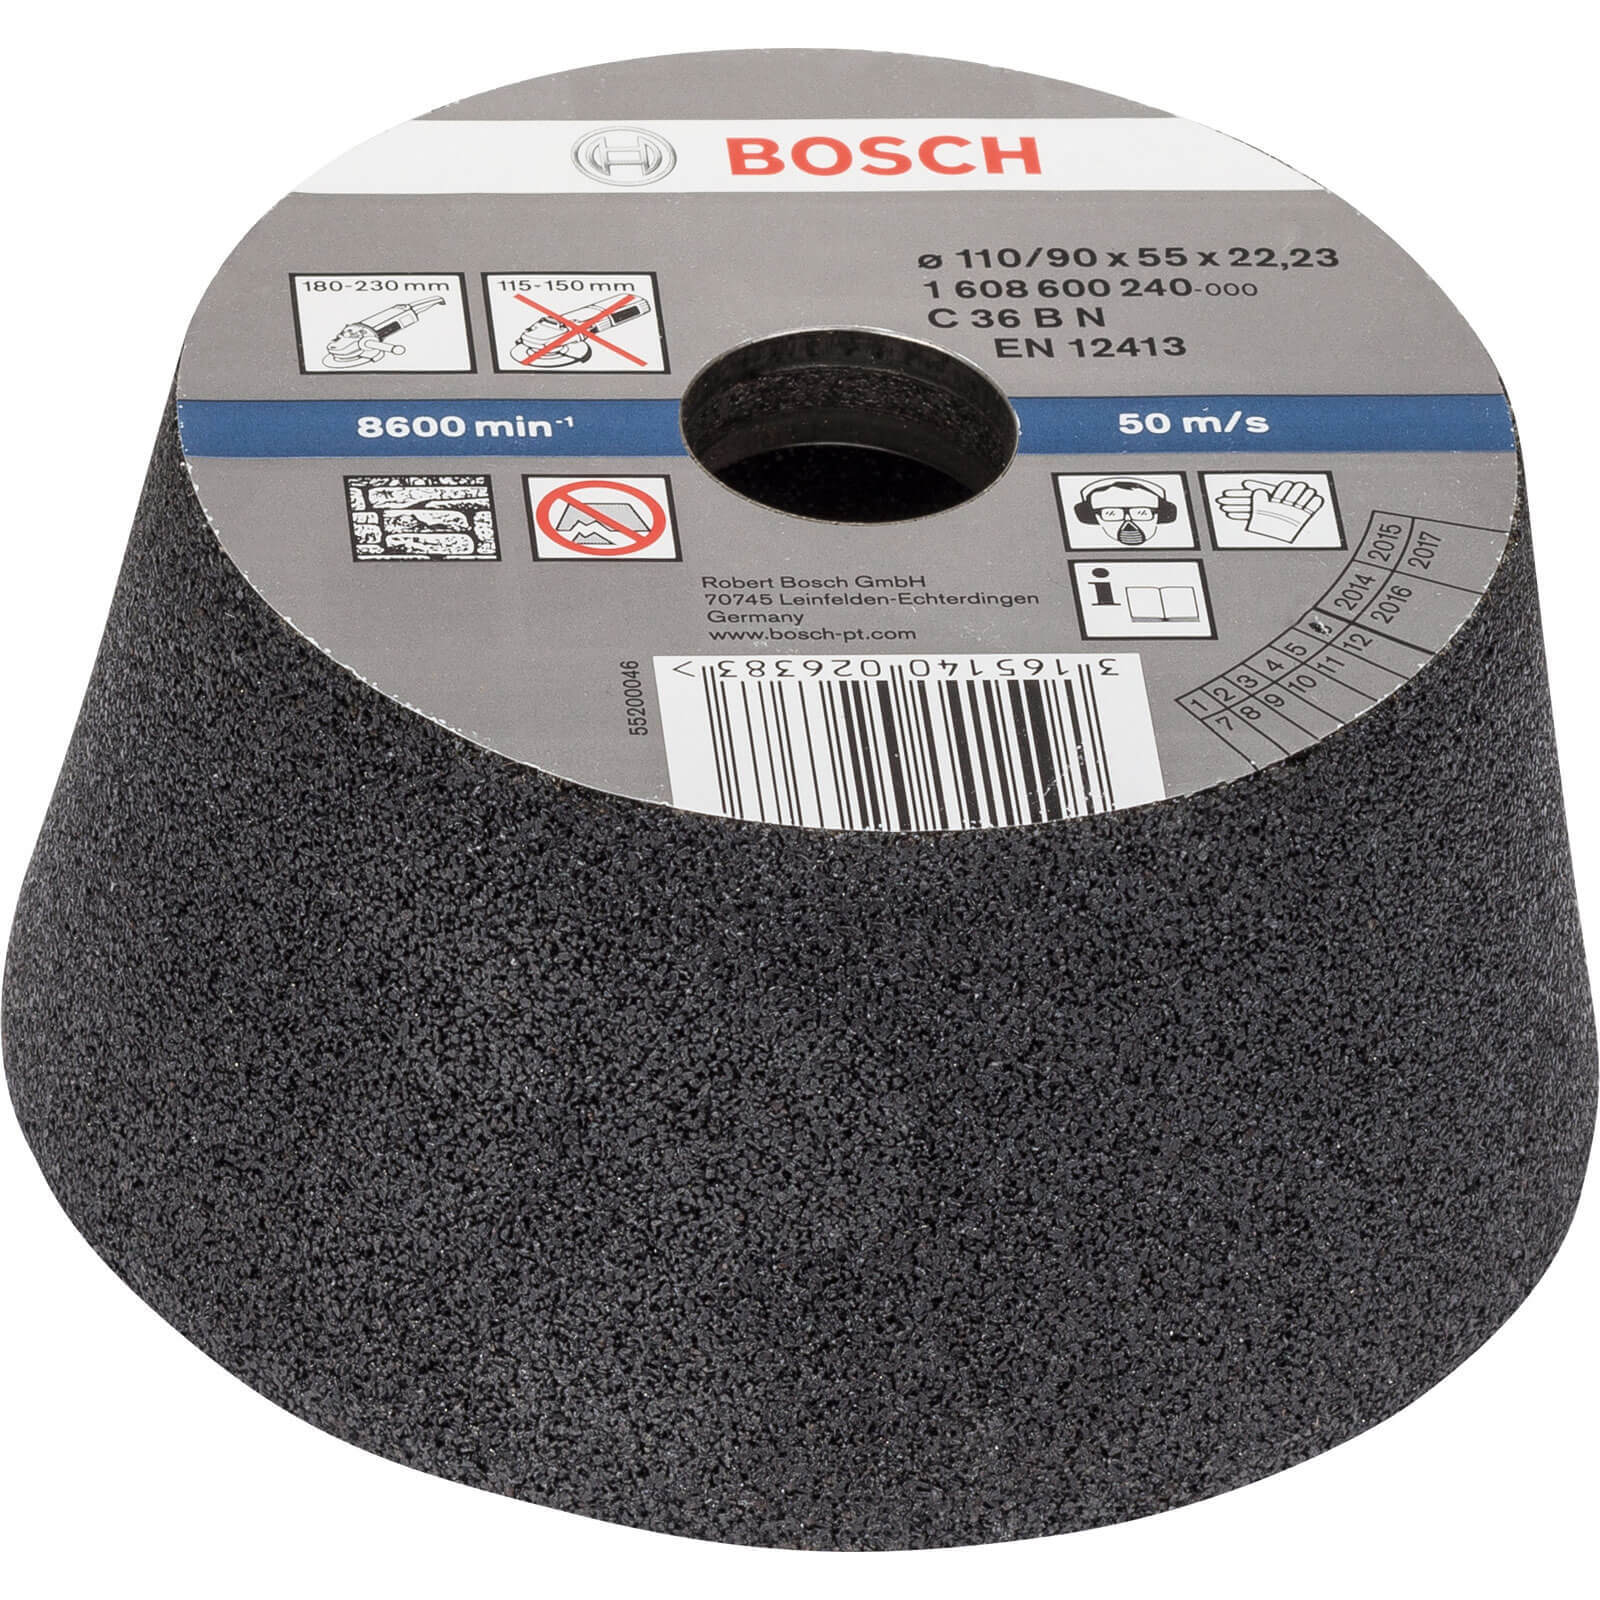 Bosch Conical Abrasive Cup Wheel for Stone 110mm 36g